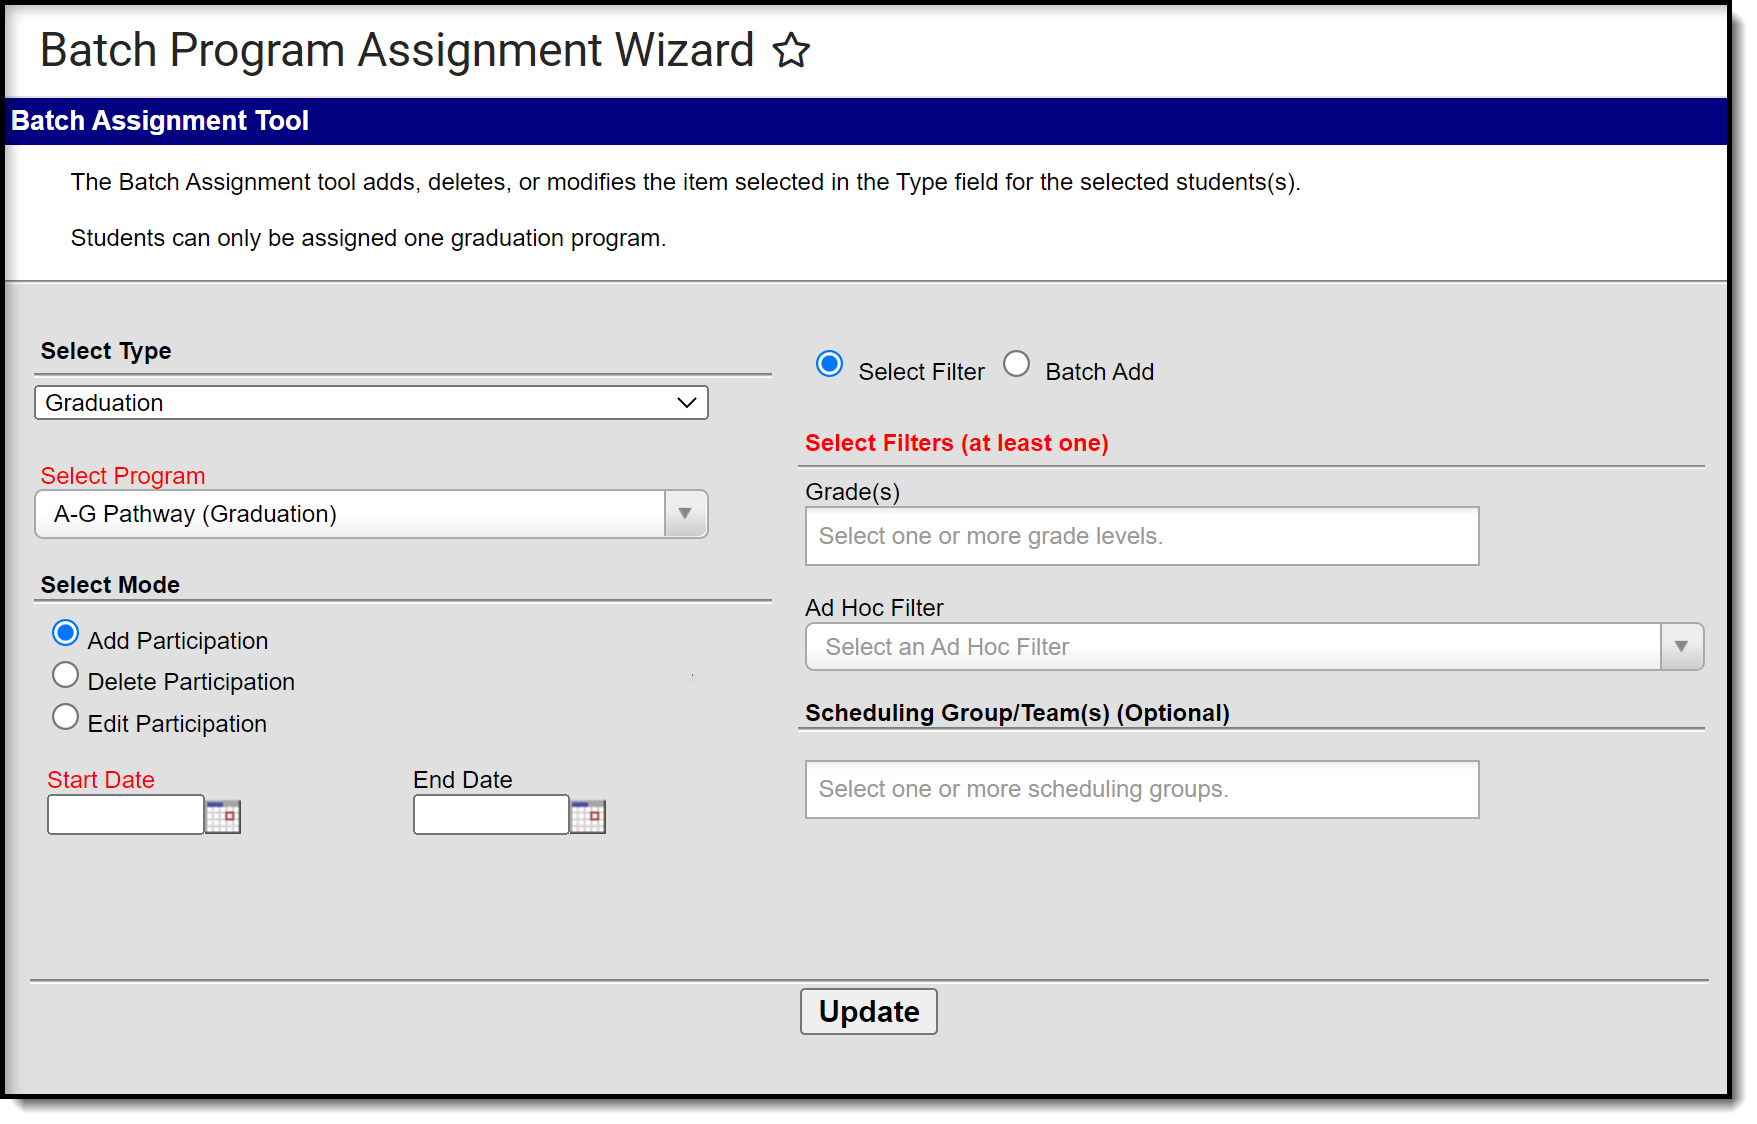 Screenshot of Batch Program Assignment Wizard tool options for selection.